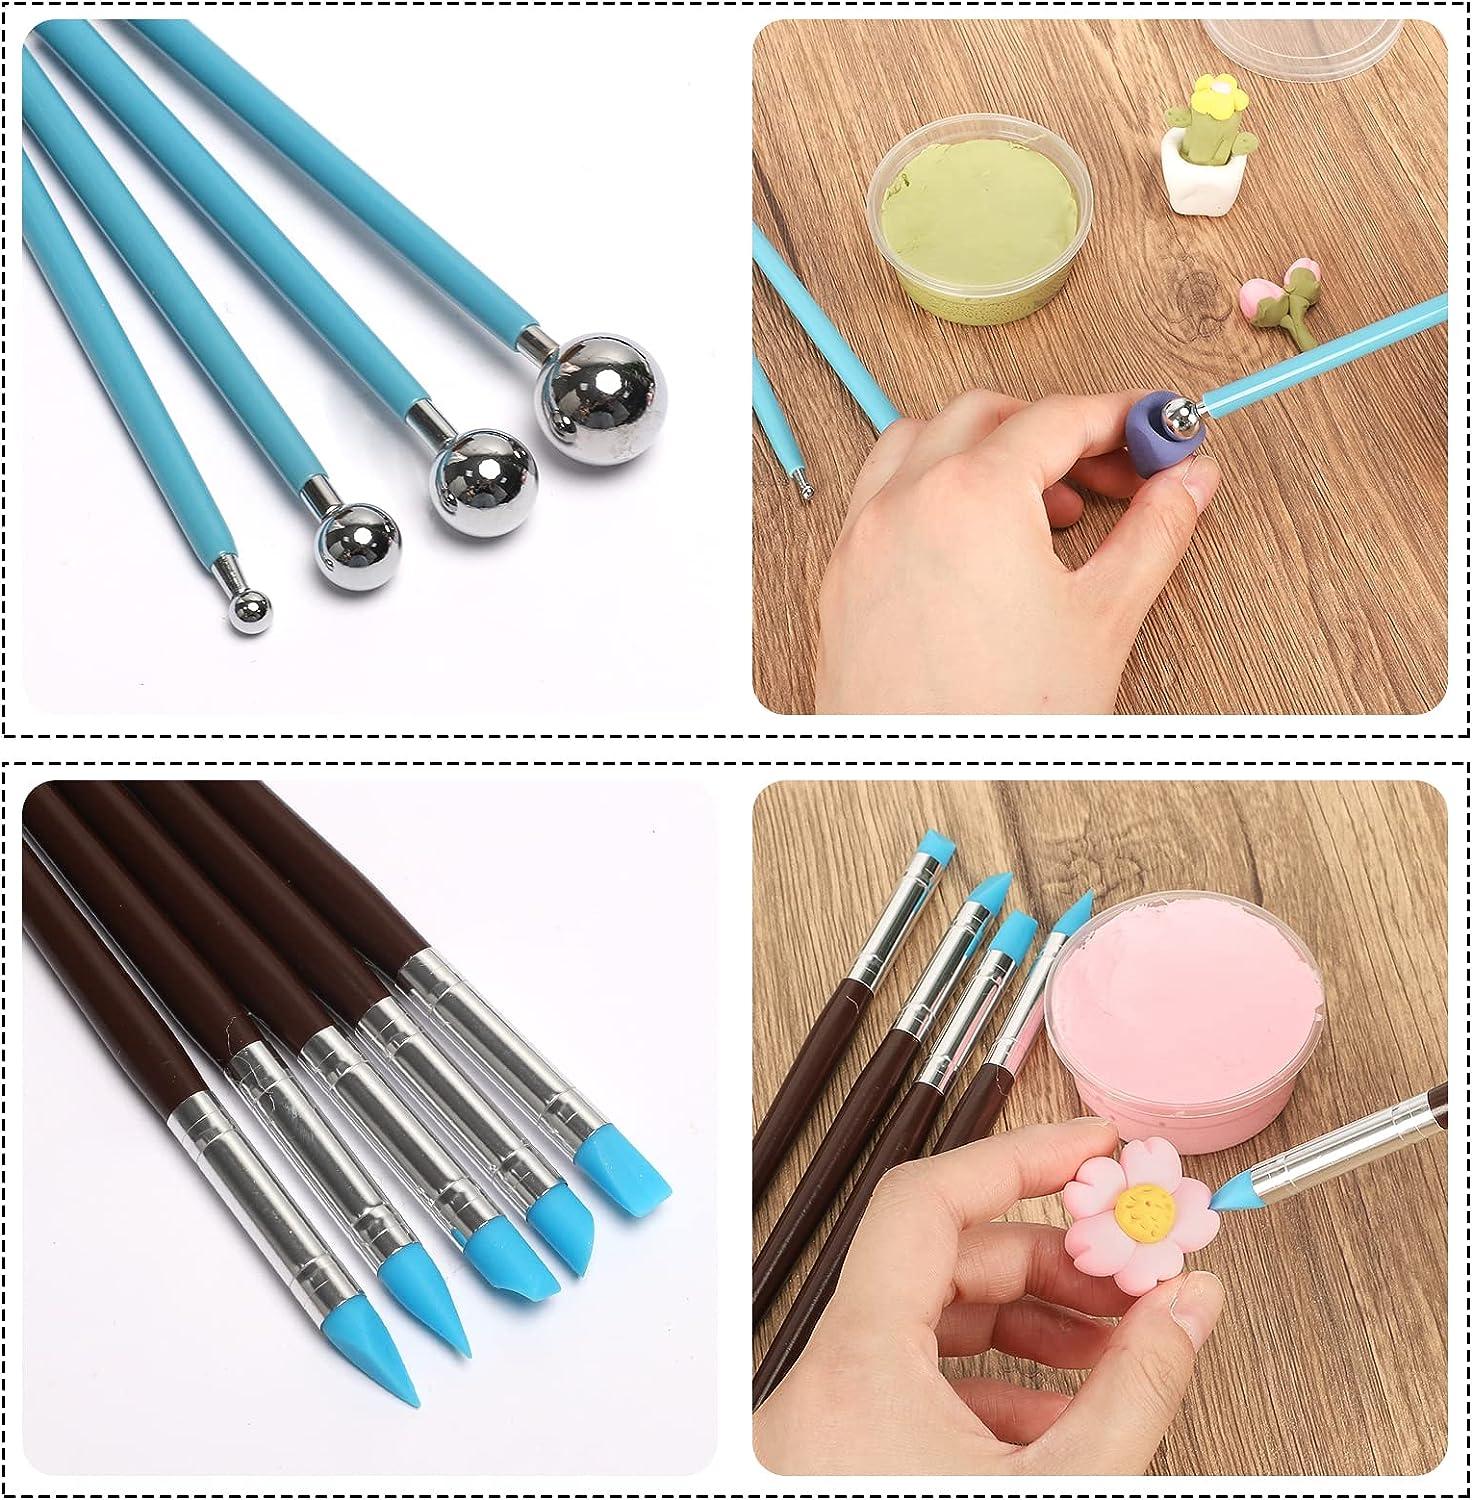 Polymer Clay Tools, Sculpting Kit, Pottery Tools